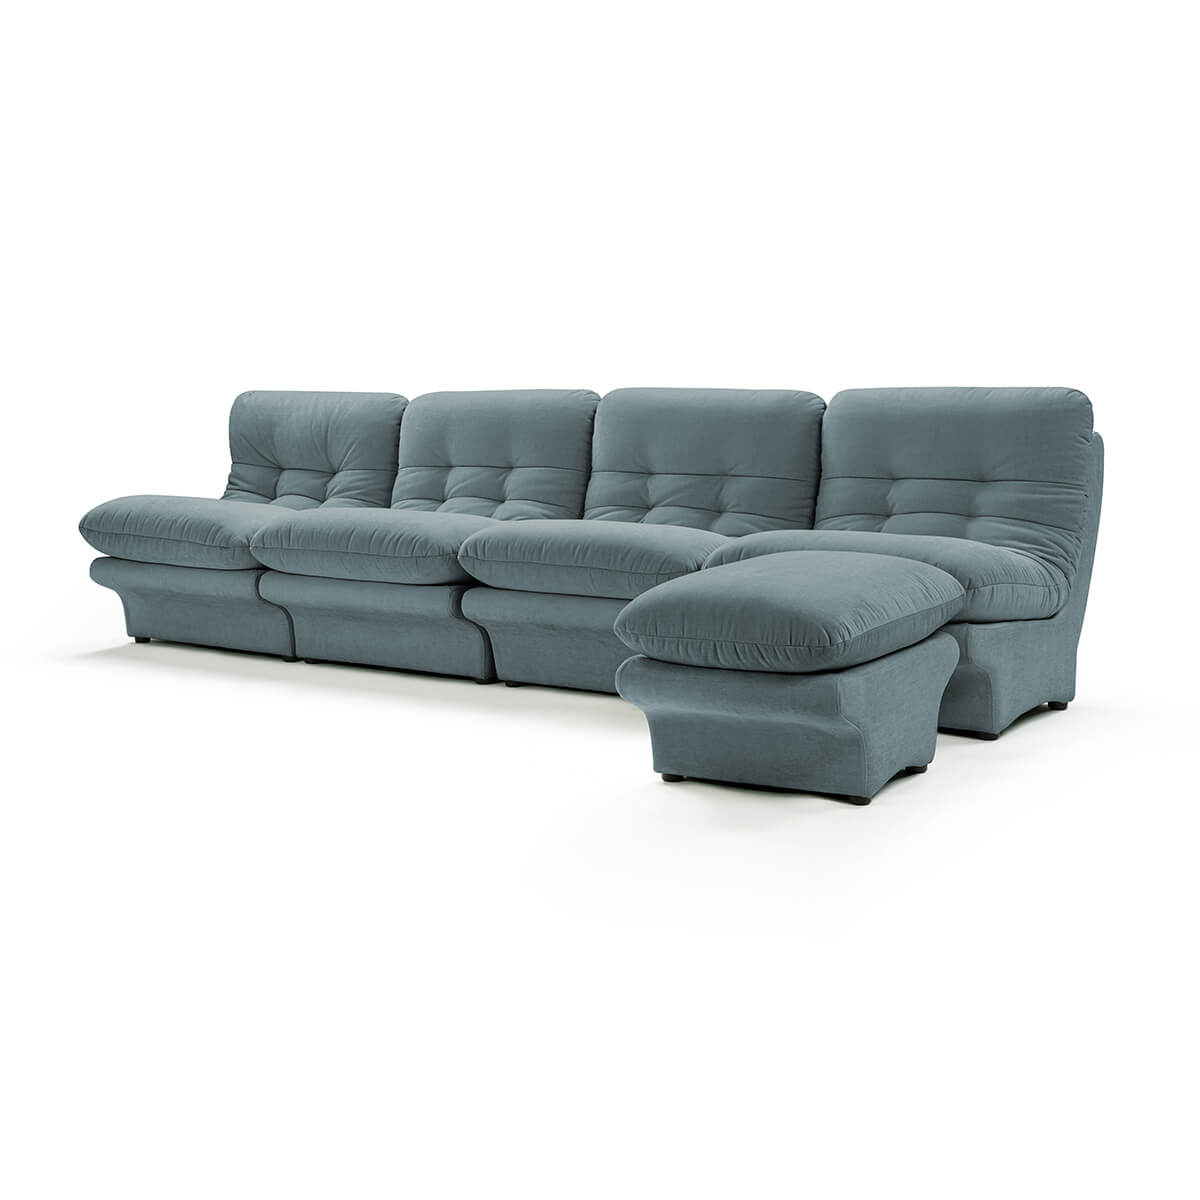 Carsons Mid Century Curved Modular Sectional Sofa / Combination 002 Chenille Helios-Cerulean Blue